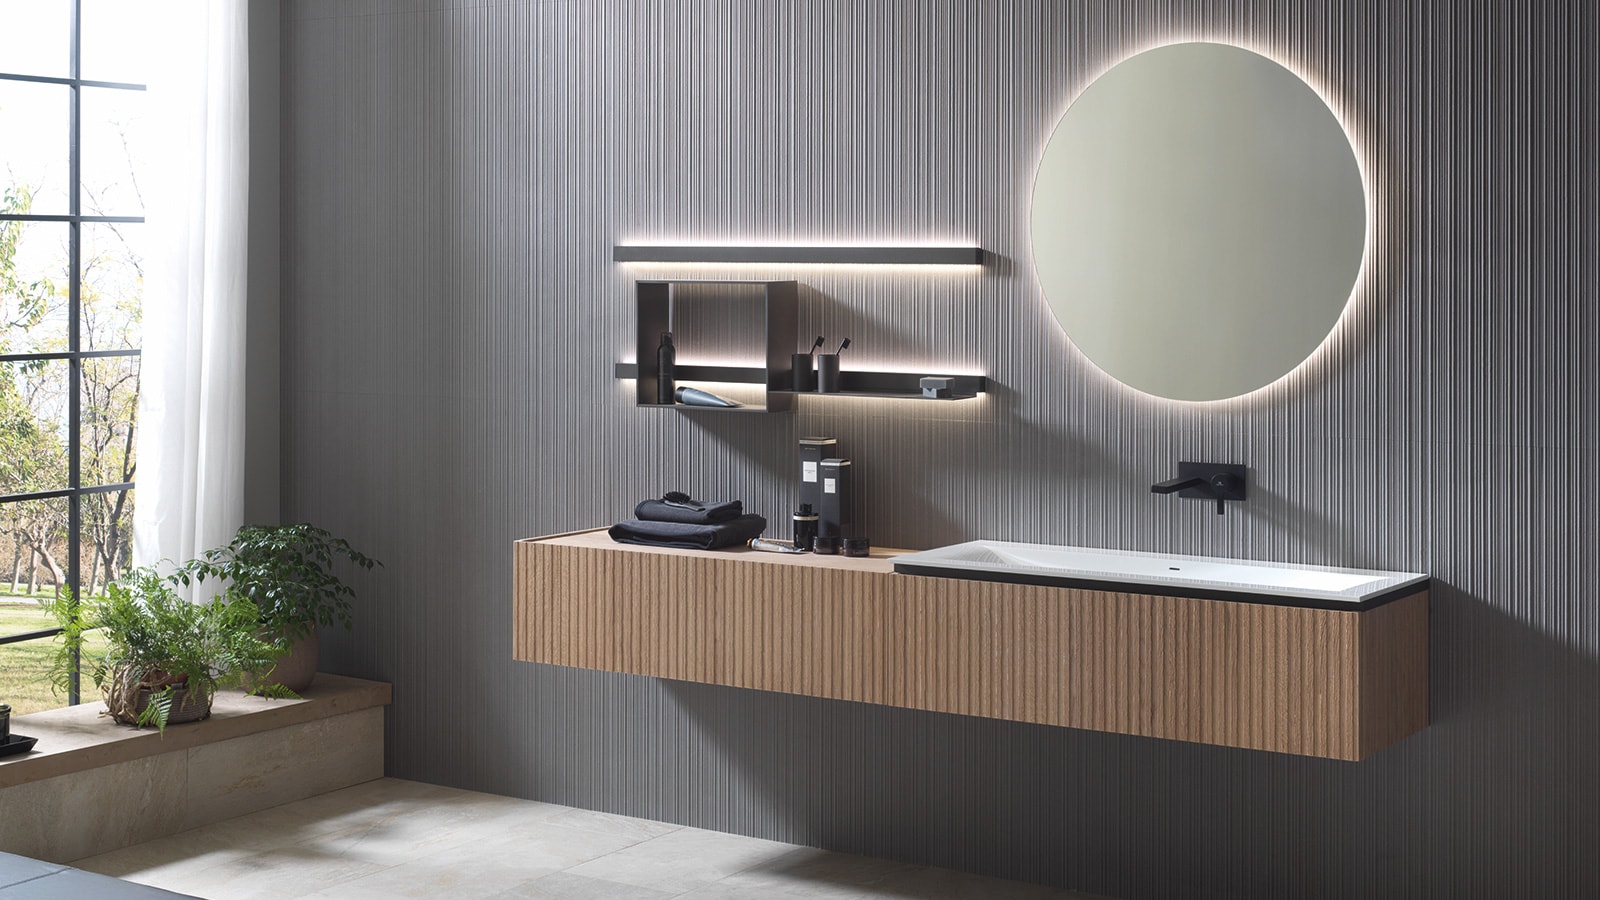 The most exclusive collection by Gamadecor for Cersaie 2022